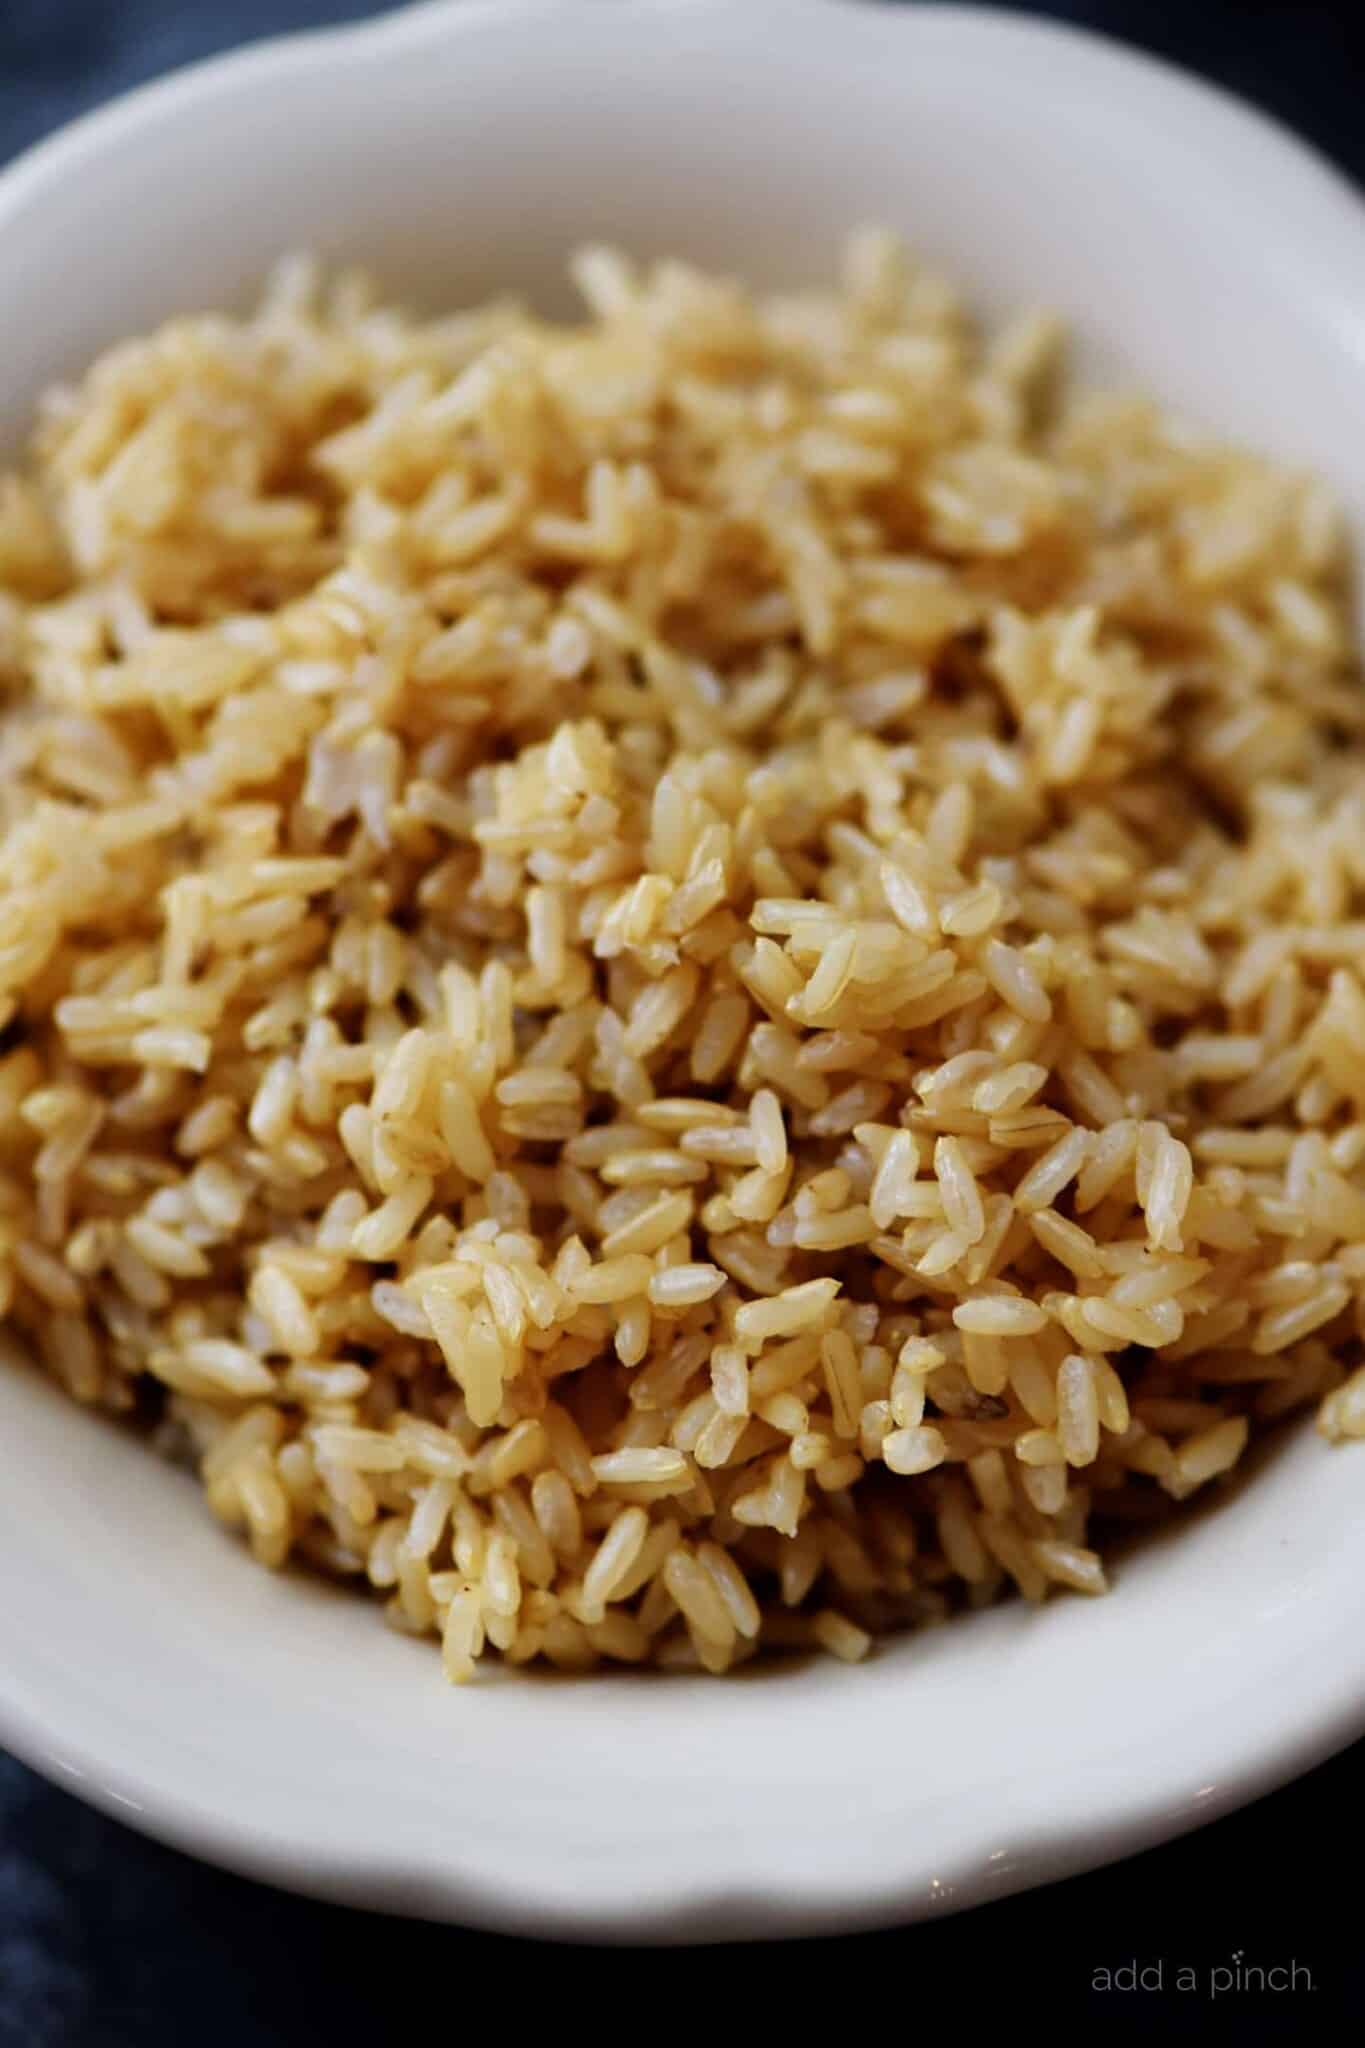 https://addapinch.com/wp-content/uploads/2018/03/instant-pot-brown-rice-recipe-0358-scaled.jpg